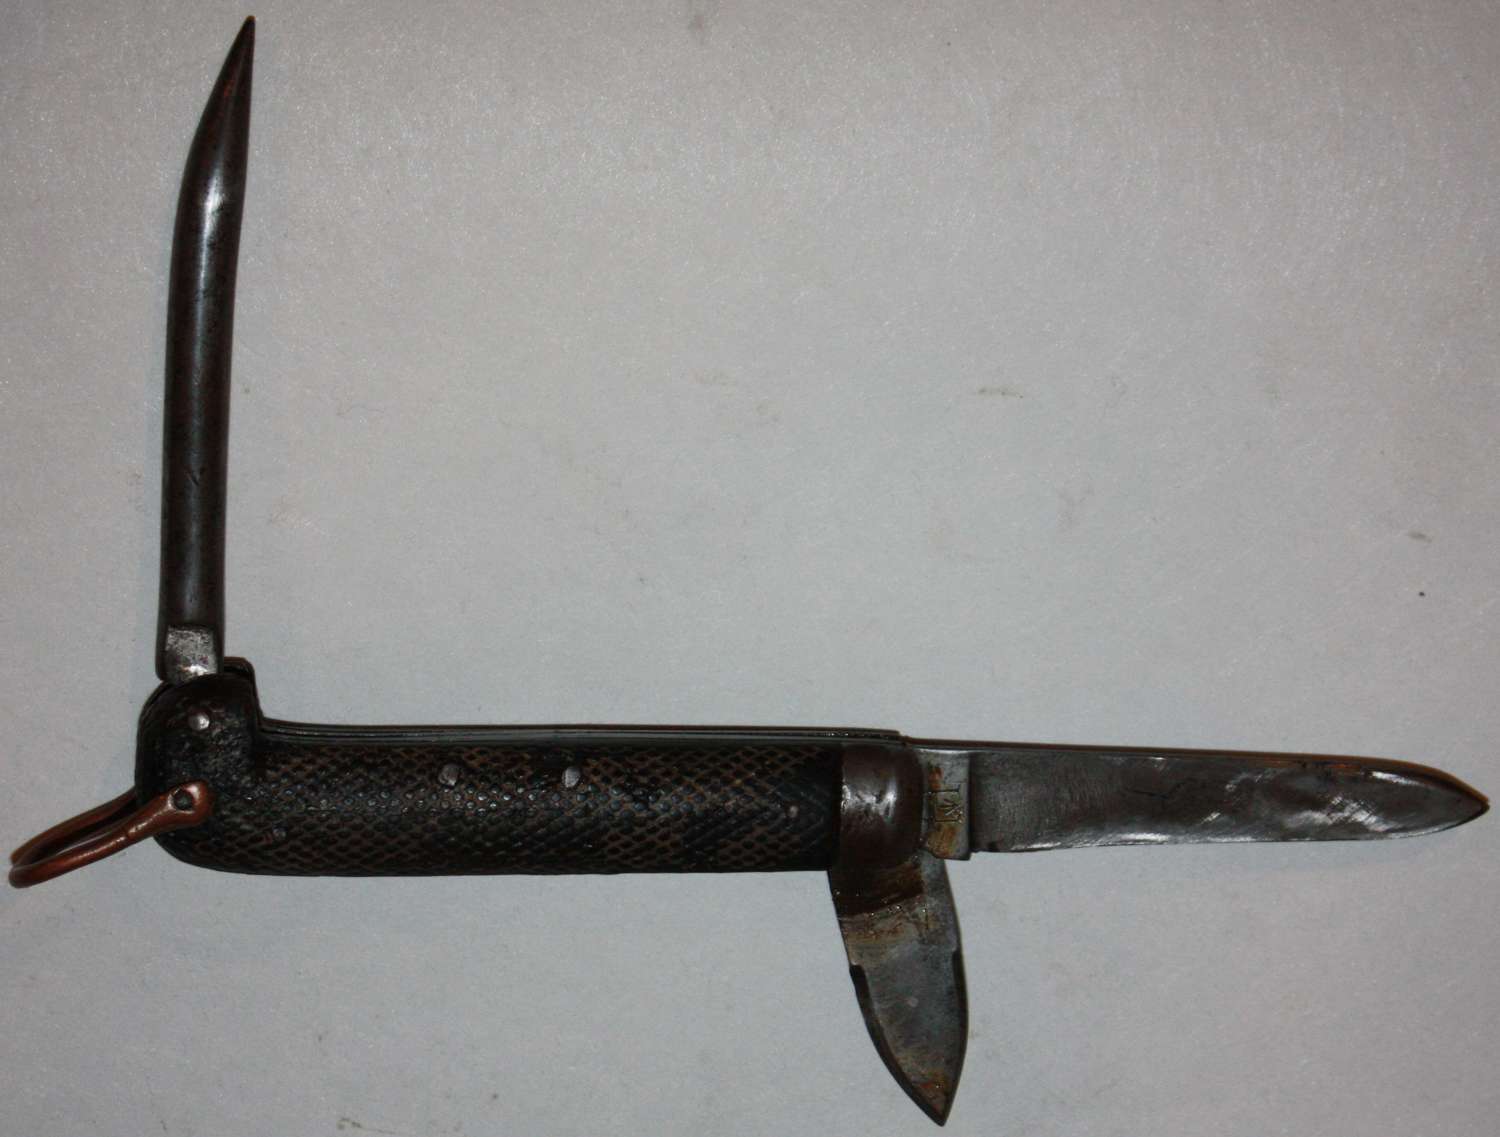 A FAIRLY GOOD USED EXAMPLE OF THE LARGE SIZE SOUTH AFRICAN CLASP KNIFE